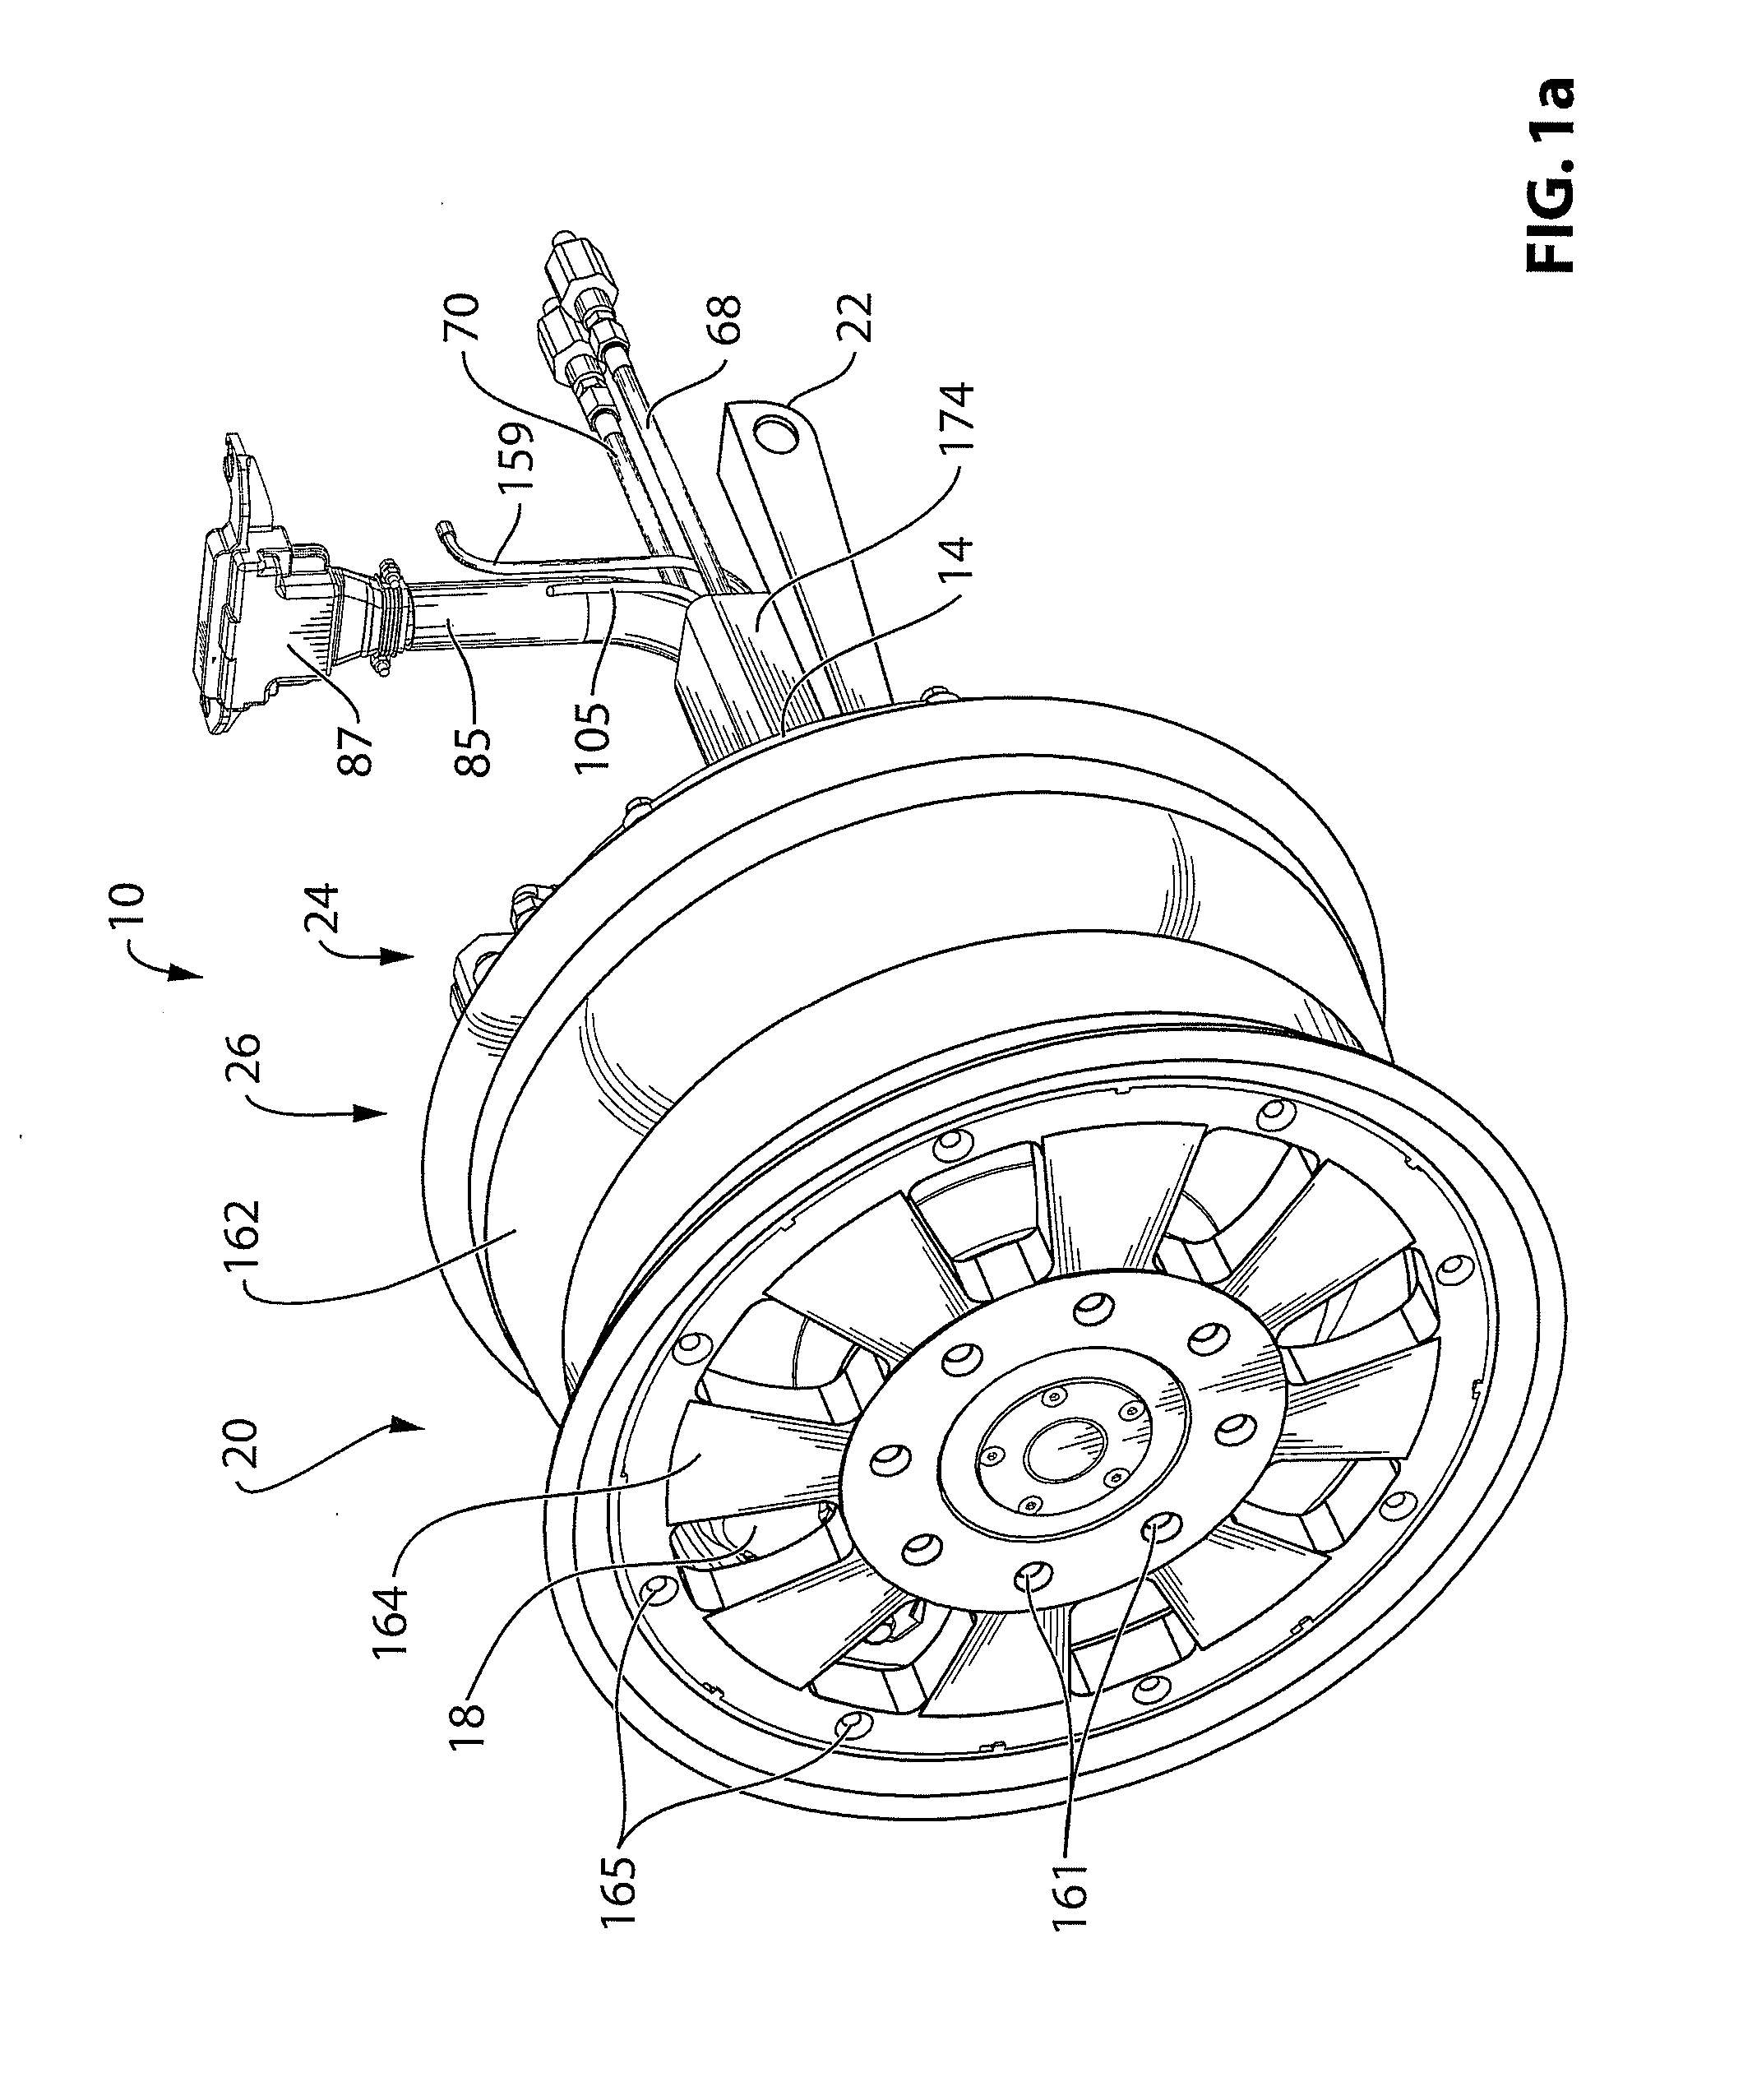 Corner assembly for vehicle